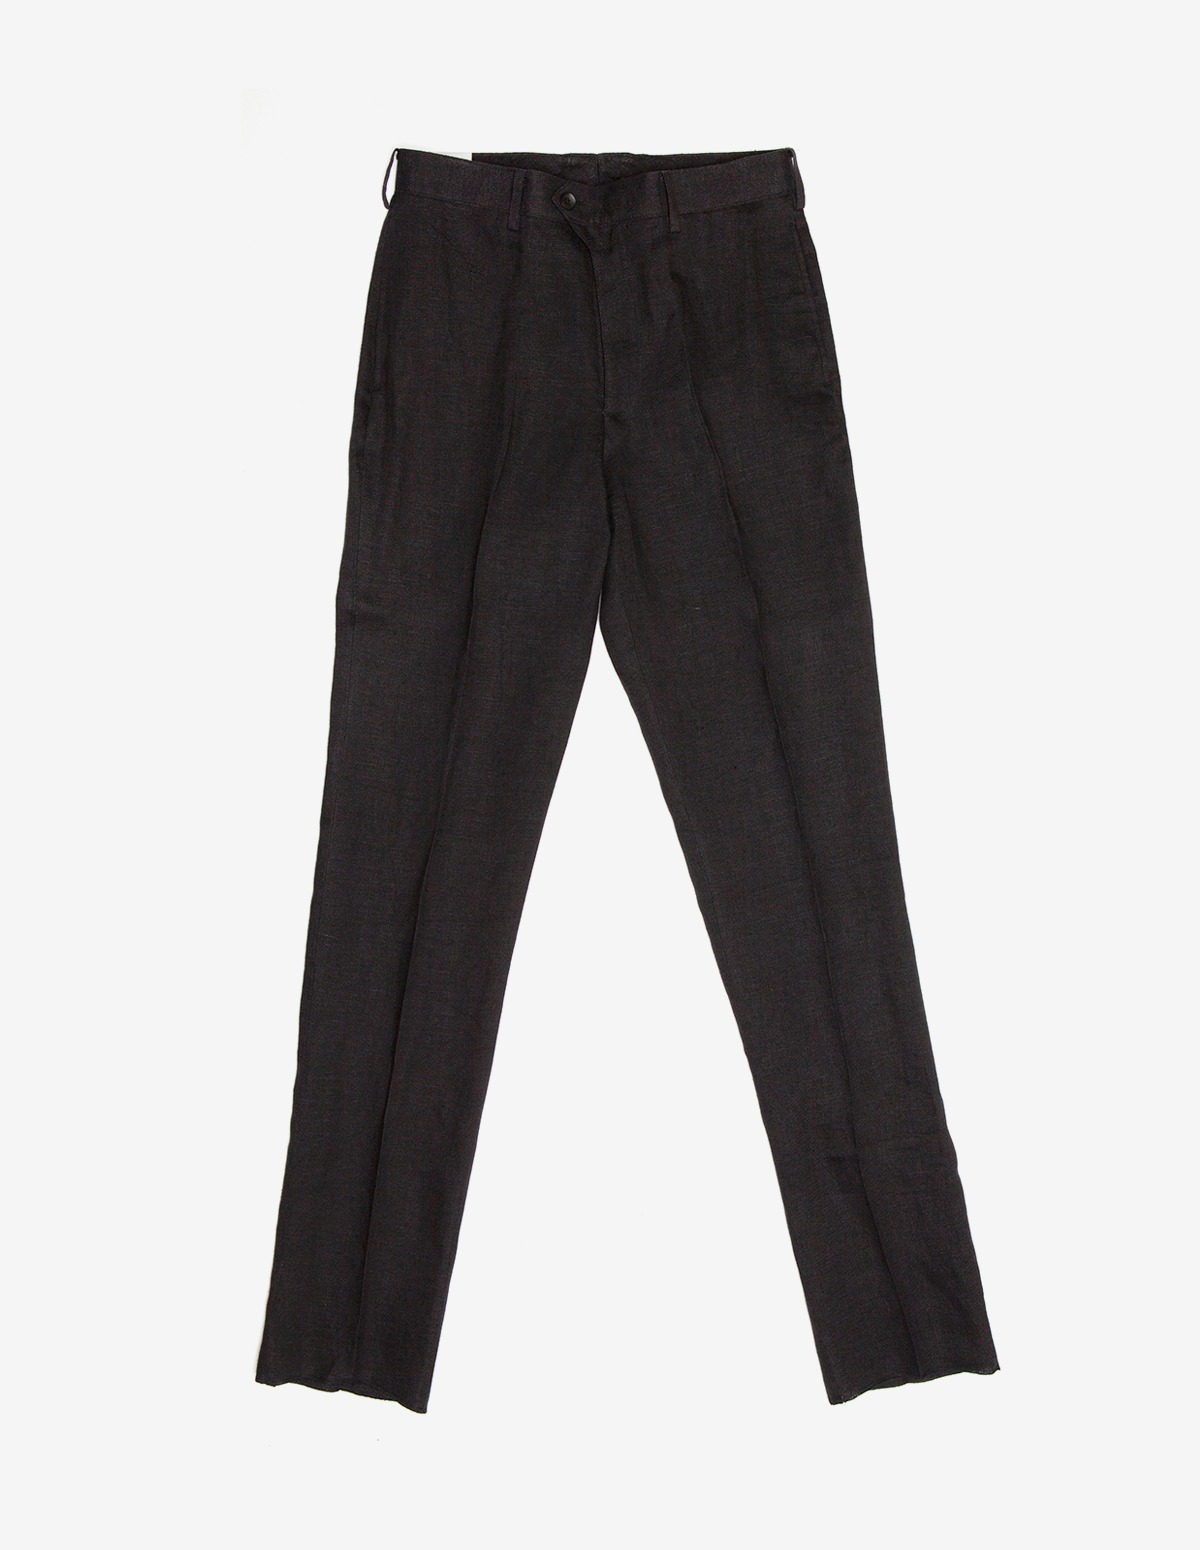 OR-1085A Black Linen Trousers